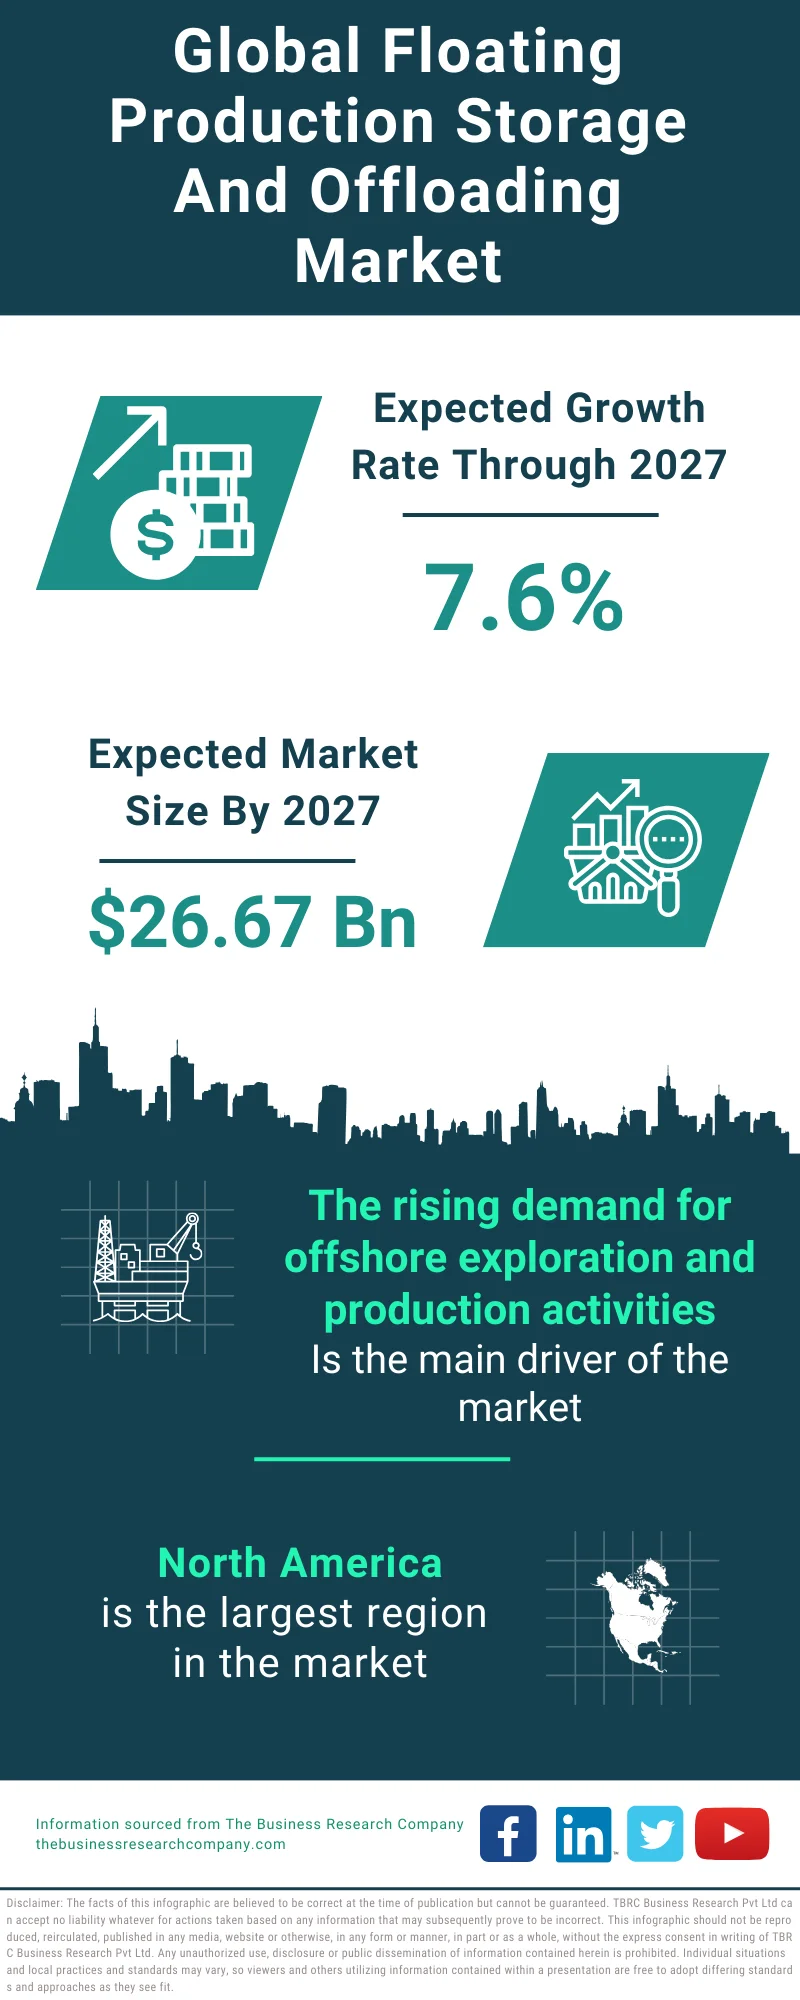 Floating Production Storage And Offloading Global Market Report 2023